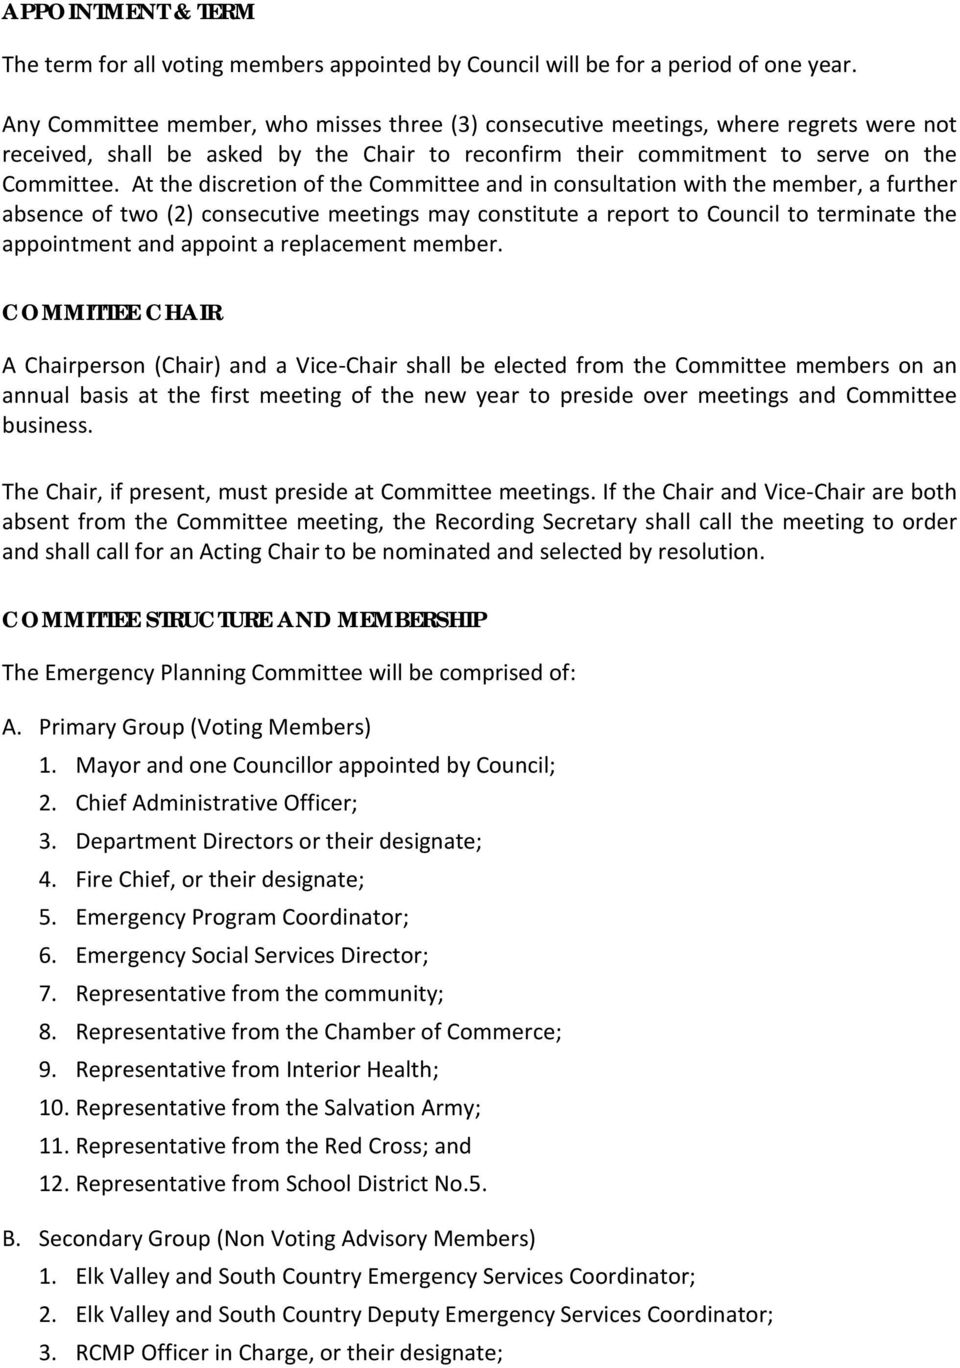 At the discretion of the Committee and in consultation with the member, a further absence of two (2) consecutive meetings may constitute a report to Council to terminate the appointment and appoint a